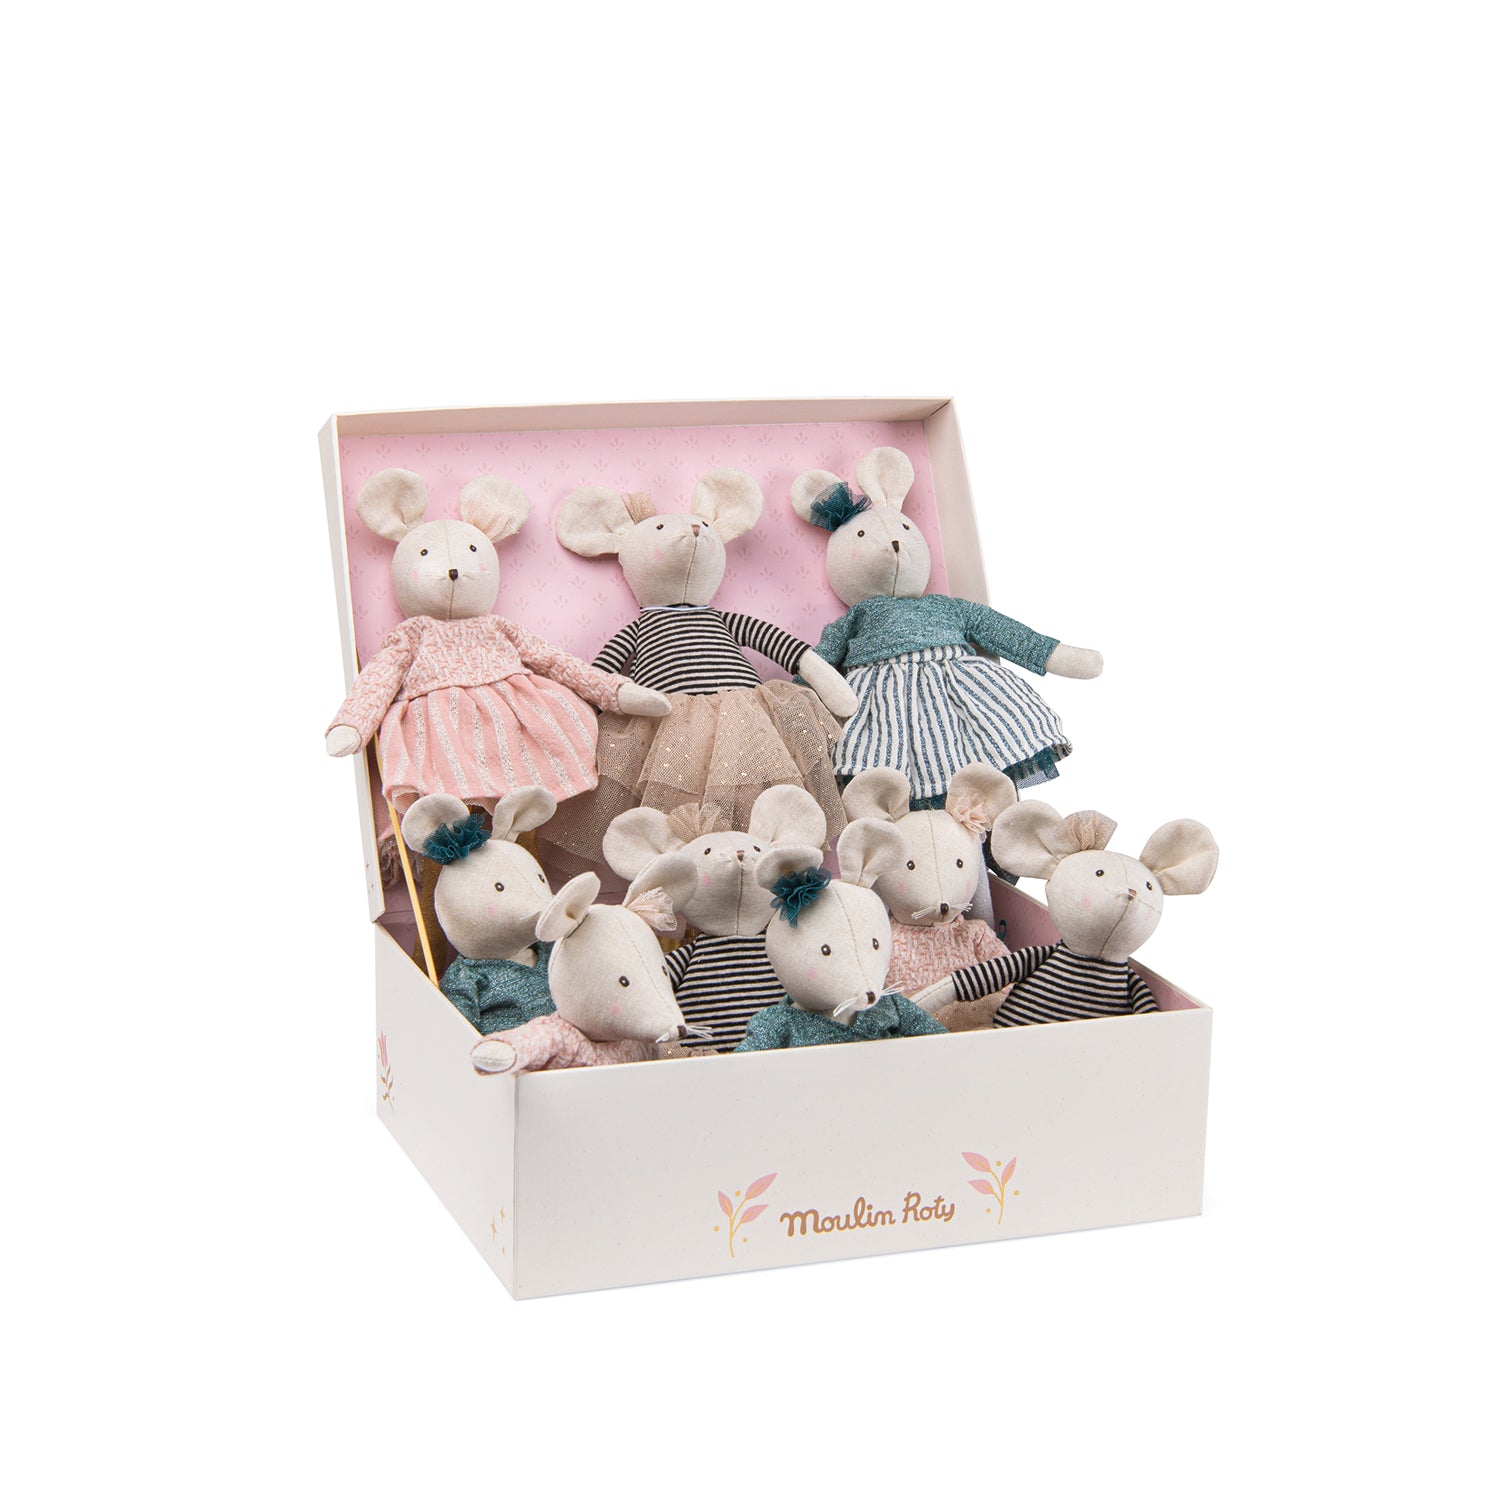 <h5>Description</h5>
<p>In this new collection, this is an assortment of 9 little mice with delicately powdered cheeks (pink, blue and gold), dressed in their dance outfits and accessories.<br>They come in a pretty display box featuring the sweet illustrations of the Little School of Dance collection.  </p>
<h5>Specifications</h5>
<p> <strong>Color</strong>: Multicolored<br><strong>Recommended Age</strong>: 0+<br><strong>Material</strong>: Cotton, Polyester, elastane, polyamide, metallic fibers<br><strong>Size (inches)</strong>: L: 7 x W: 15 x H: 3<br><strong>Weight (lbs)</strong>: 0,79<br><strong>Care instructions</strong>: Machine washable at 30°C on wool cycle.No tumble dry.</p>
